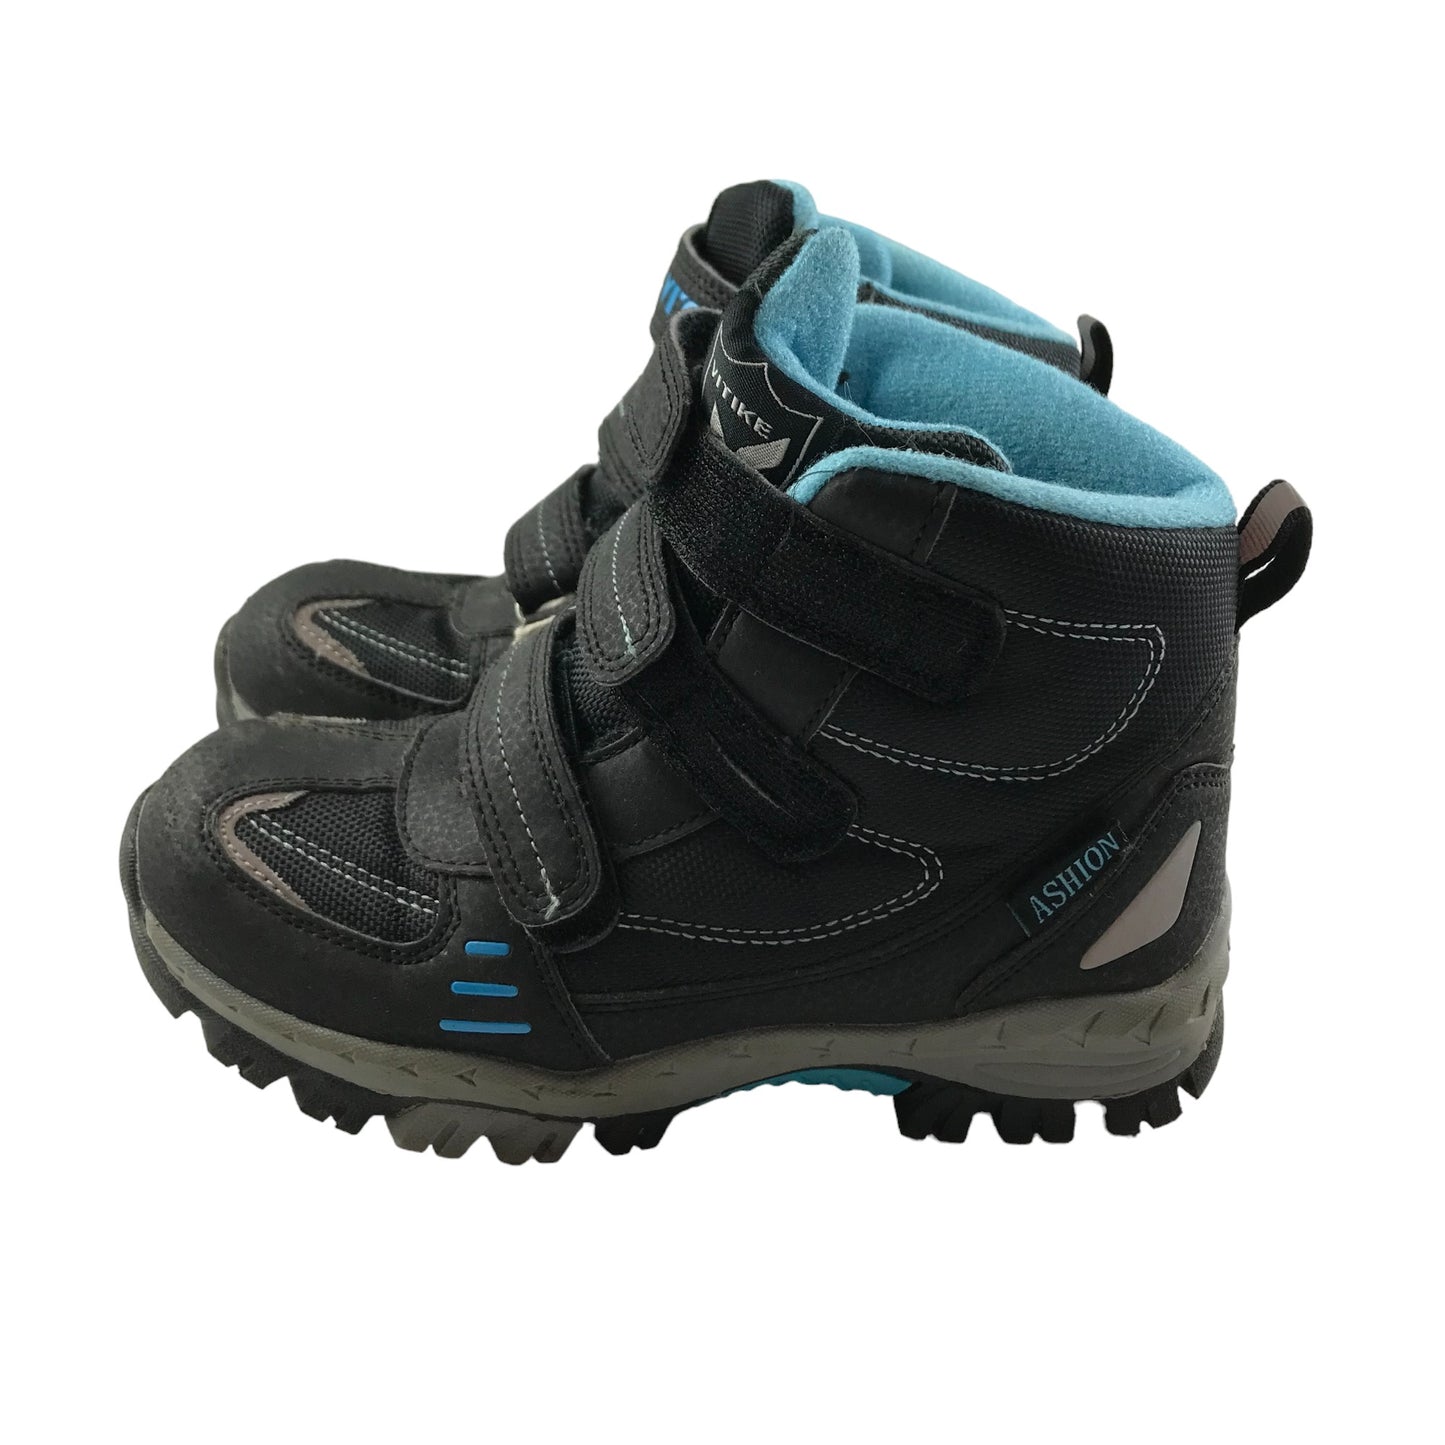 Vitike Walking Boots Shoe Size 1 Black and Blue Hiking Snow Climbing Shoes